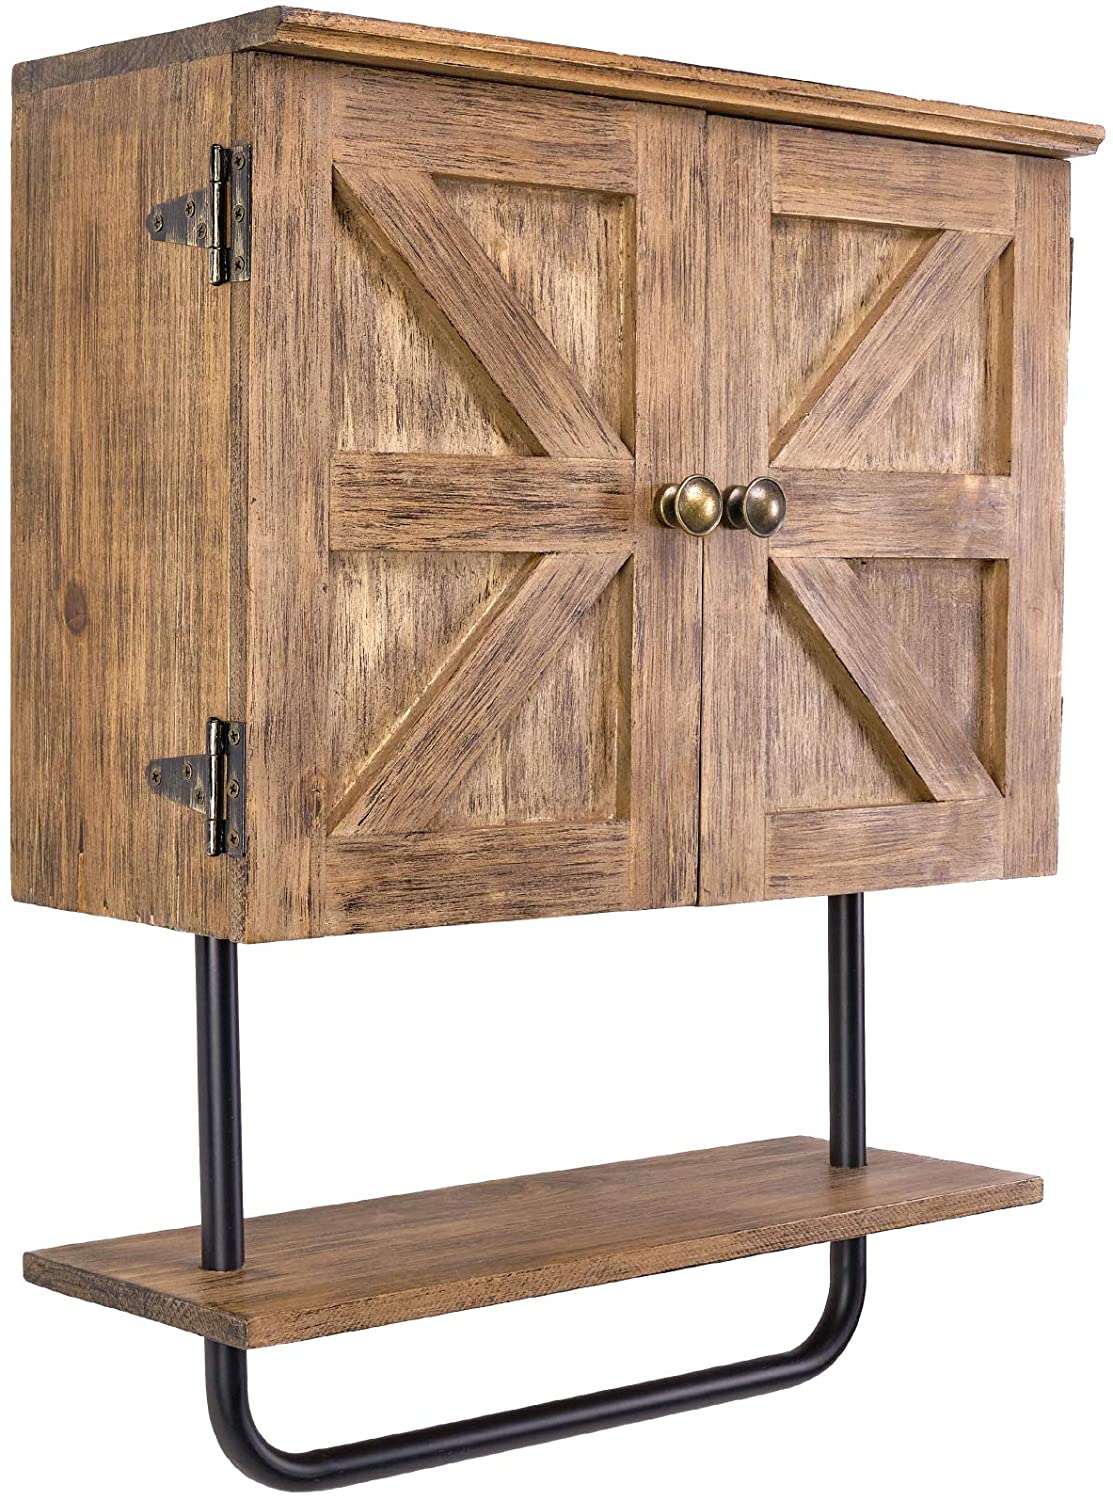 EXCELLO GLOBAL PRODUCTS Wall-Mounted Barndoor-Style Bathroom Cabinet